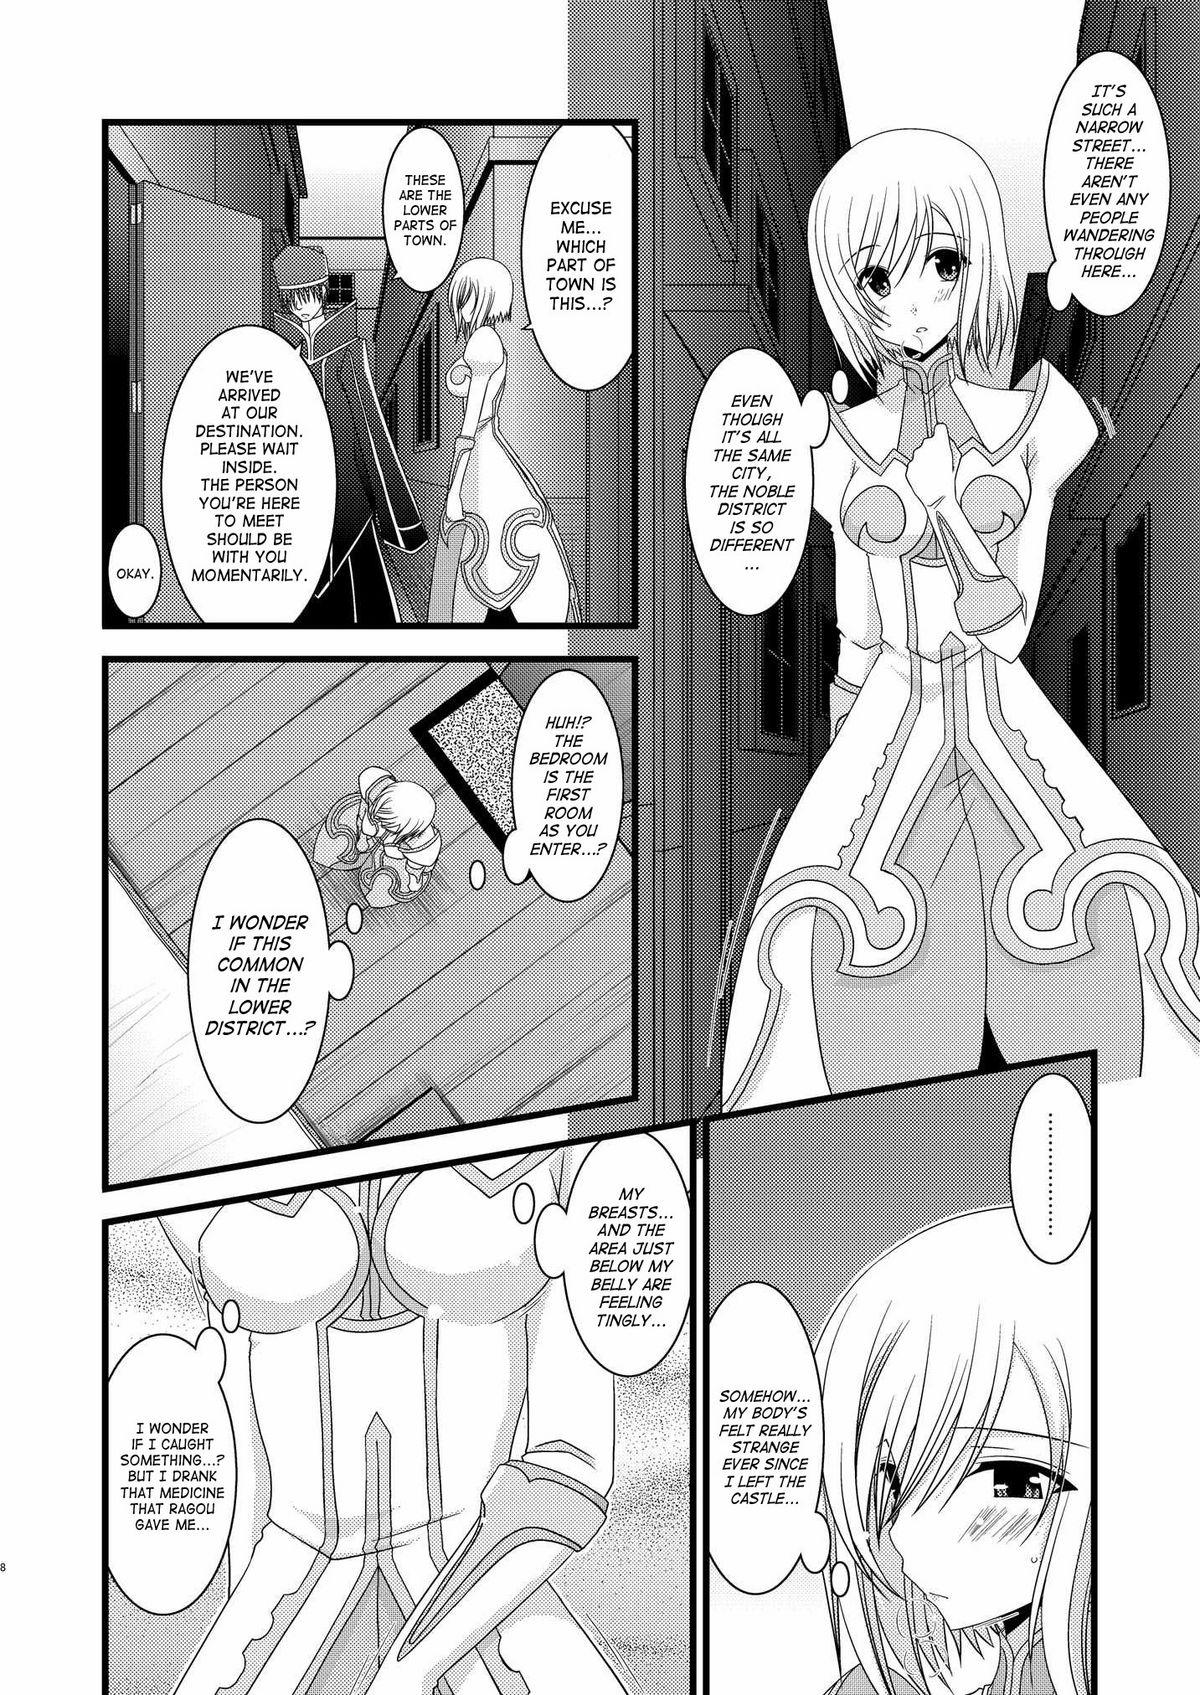 Asslicking Mangetsu San Tan | Full Moon Scattered Tale - Tales of vesperia Exgf - Page 7